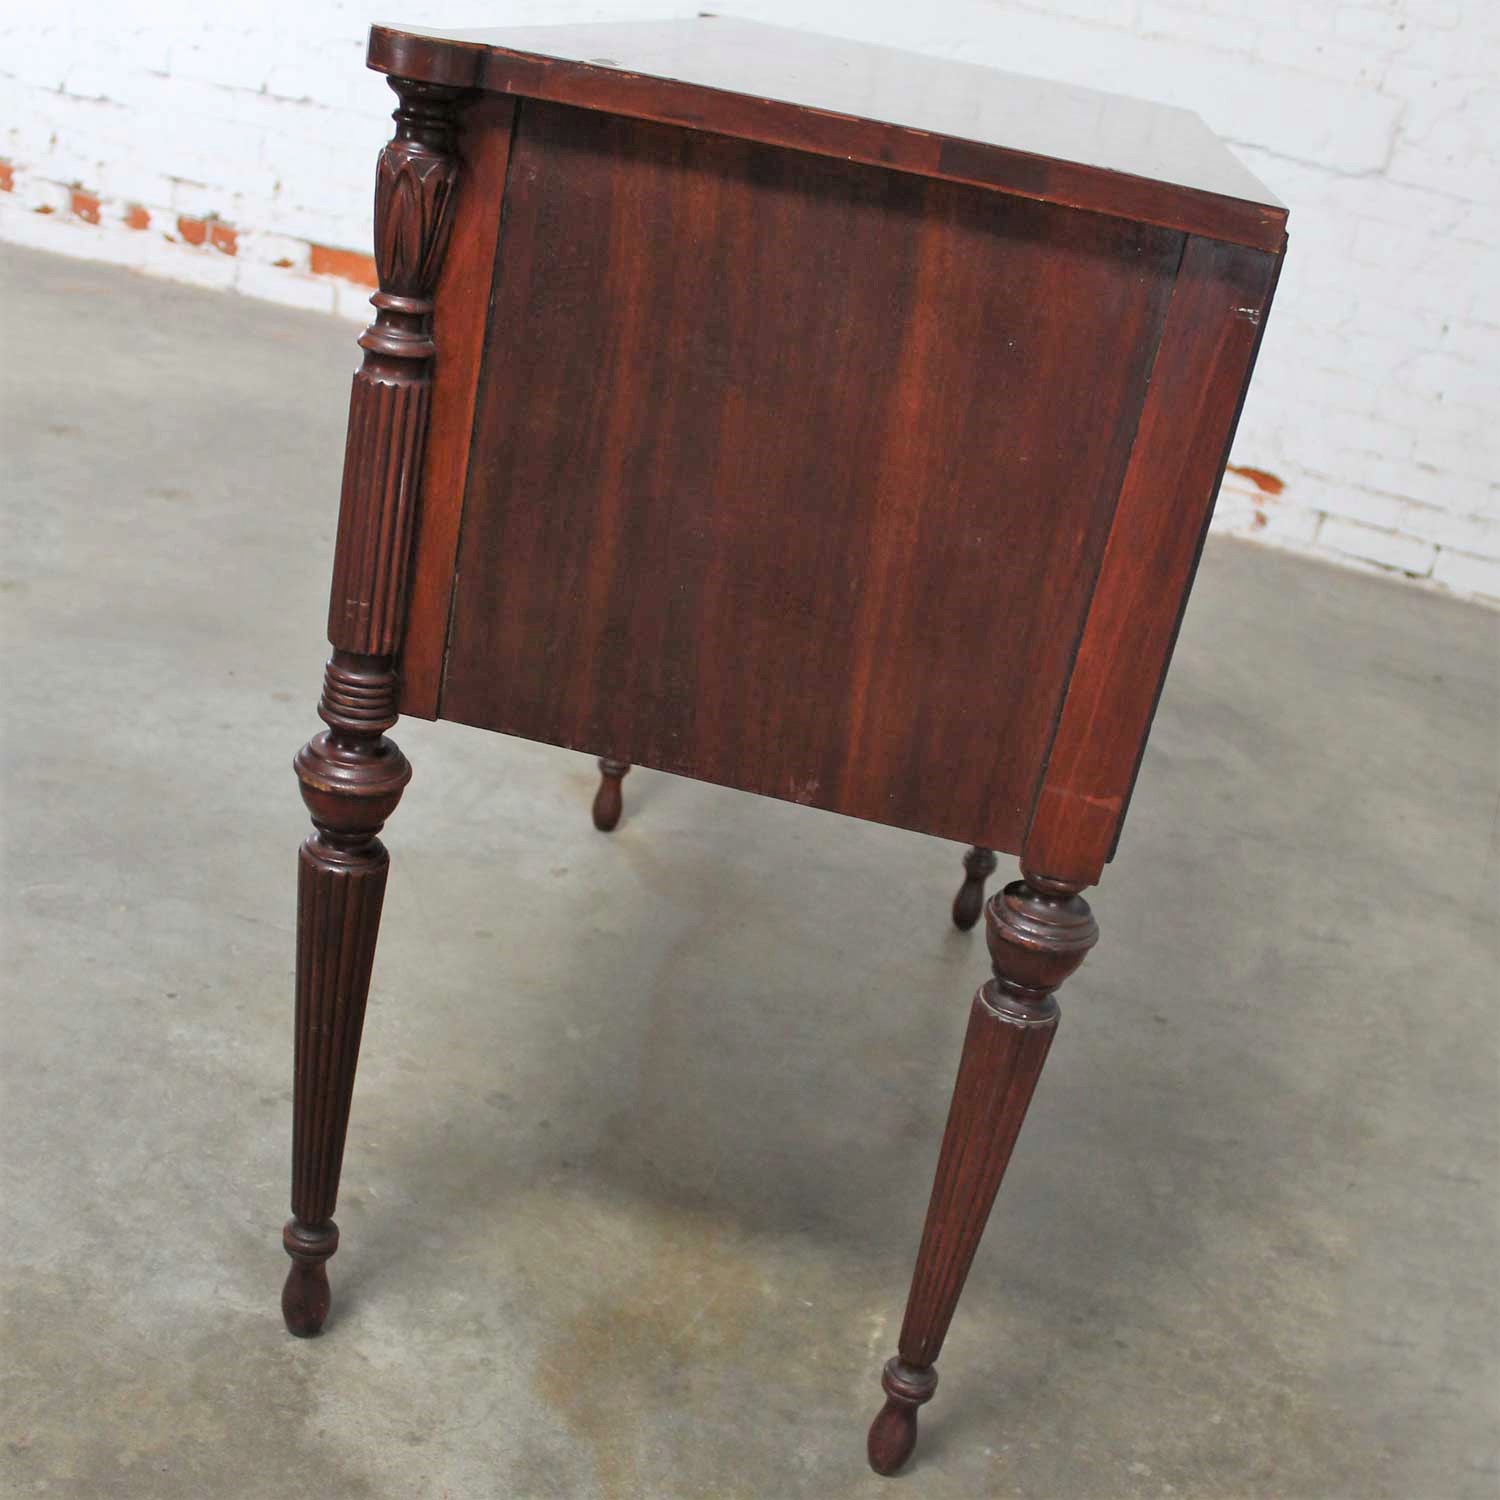 Classic Sheraton Federal Style Mahogany Server in the manor of Salem Cabinetmakers